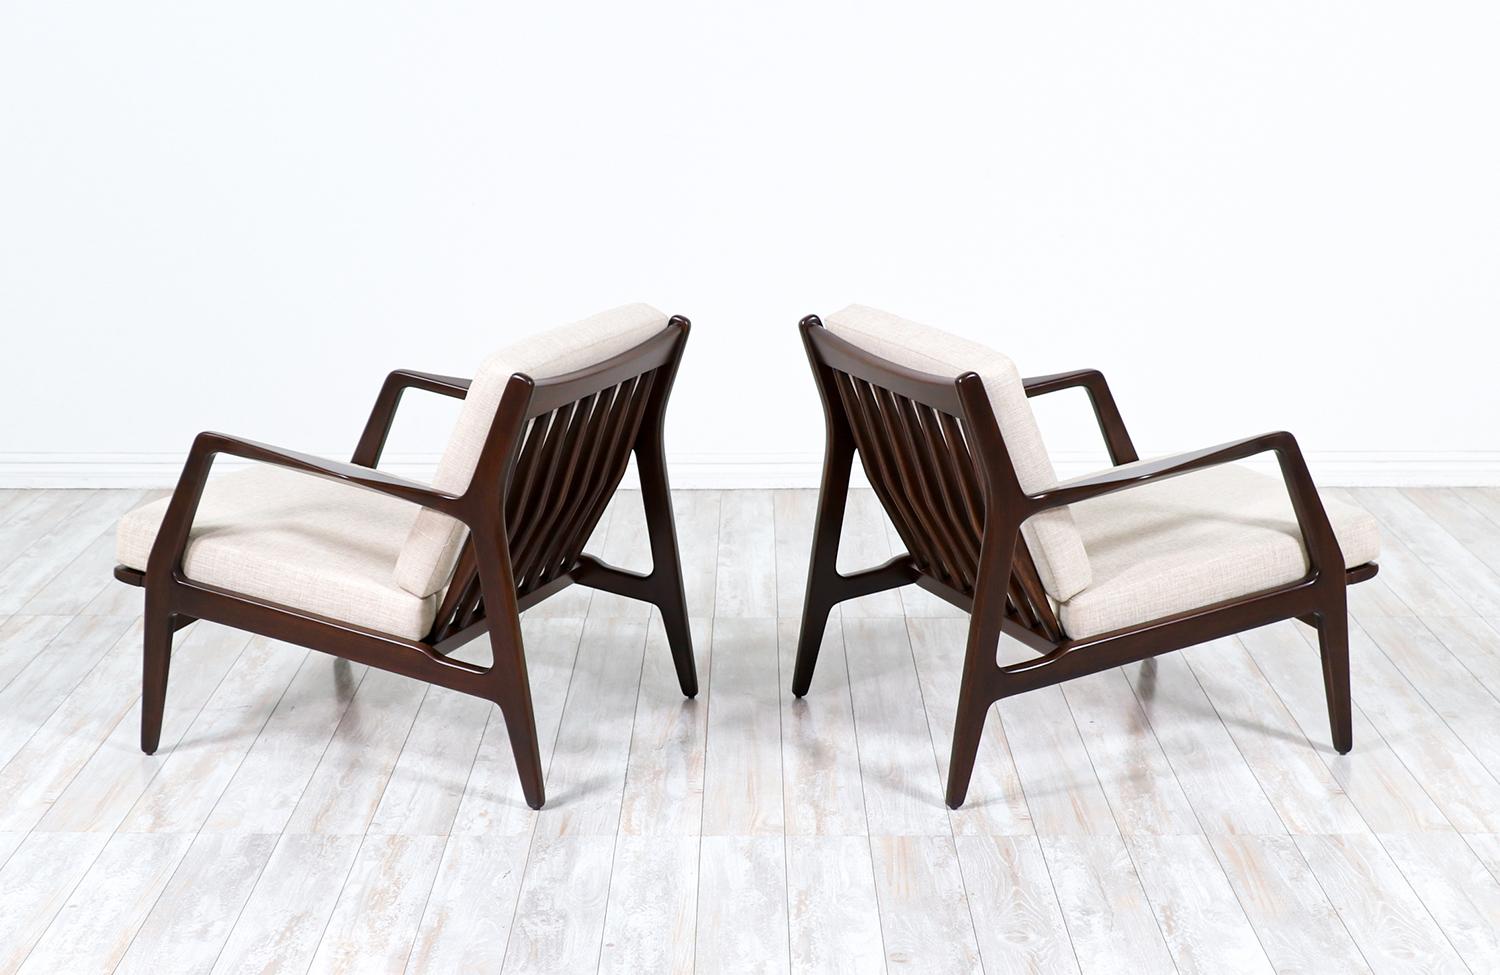 Danish Mid-Century Sculpted Lounge Chairs by Ib Kofod-Larsen for Selig